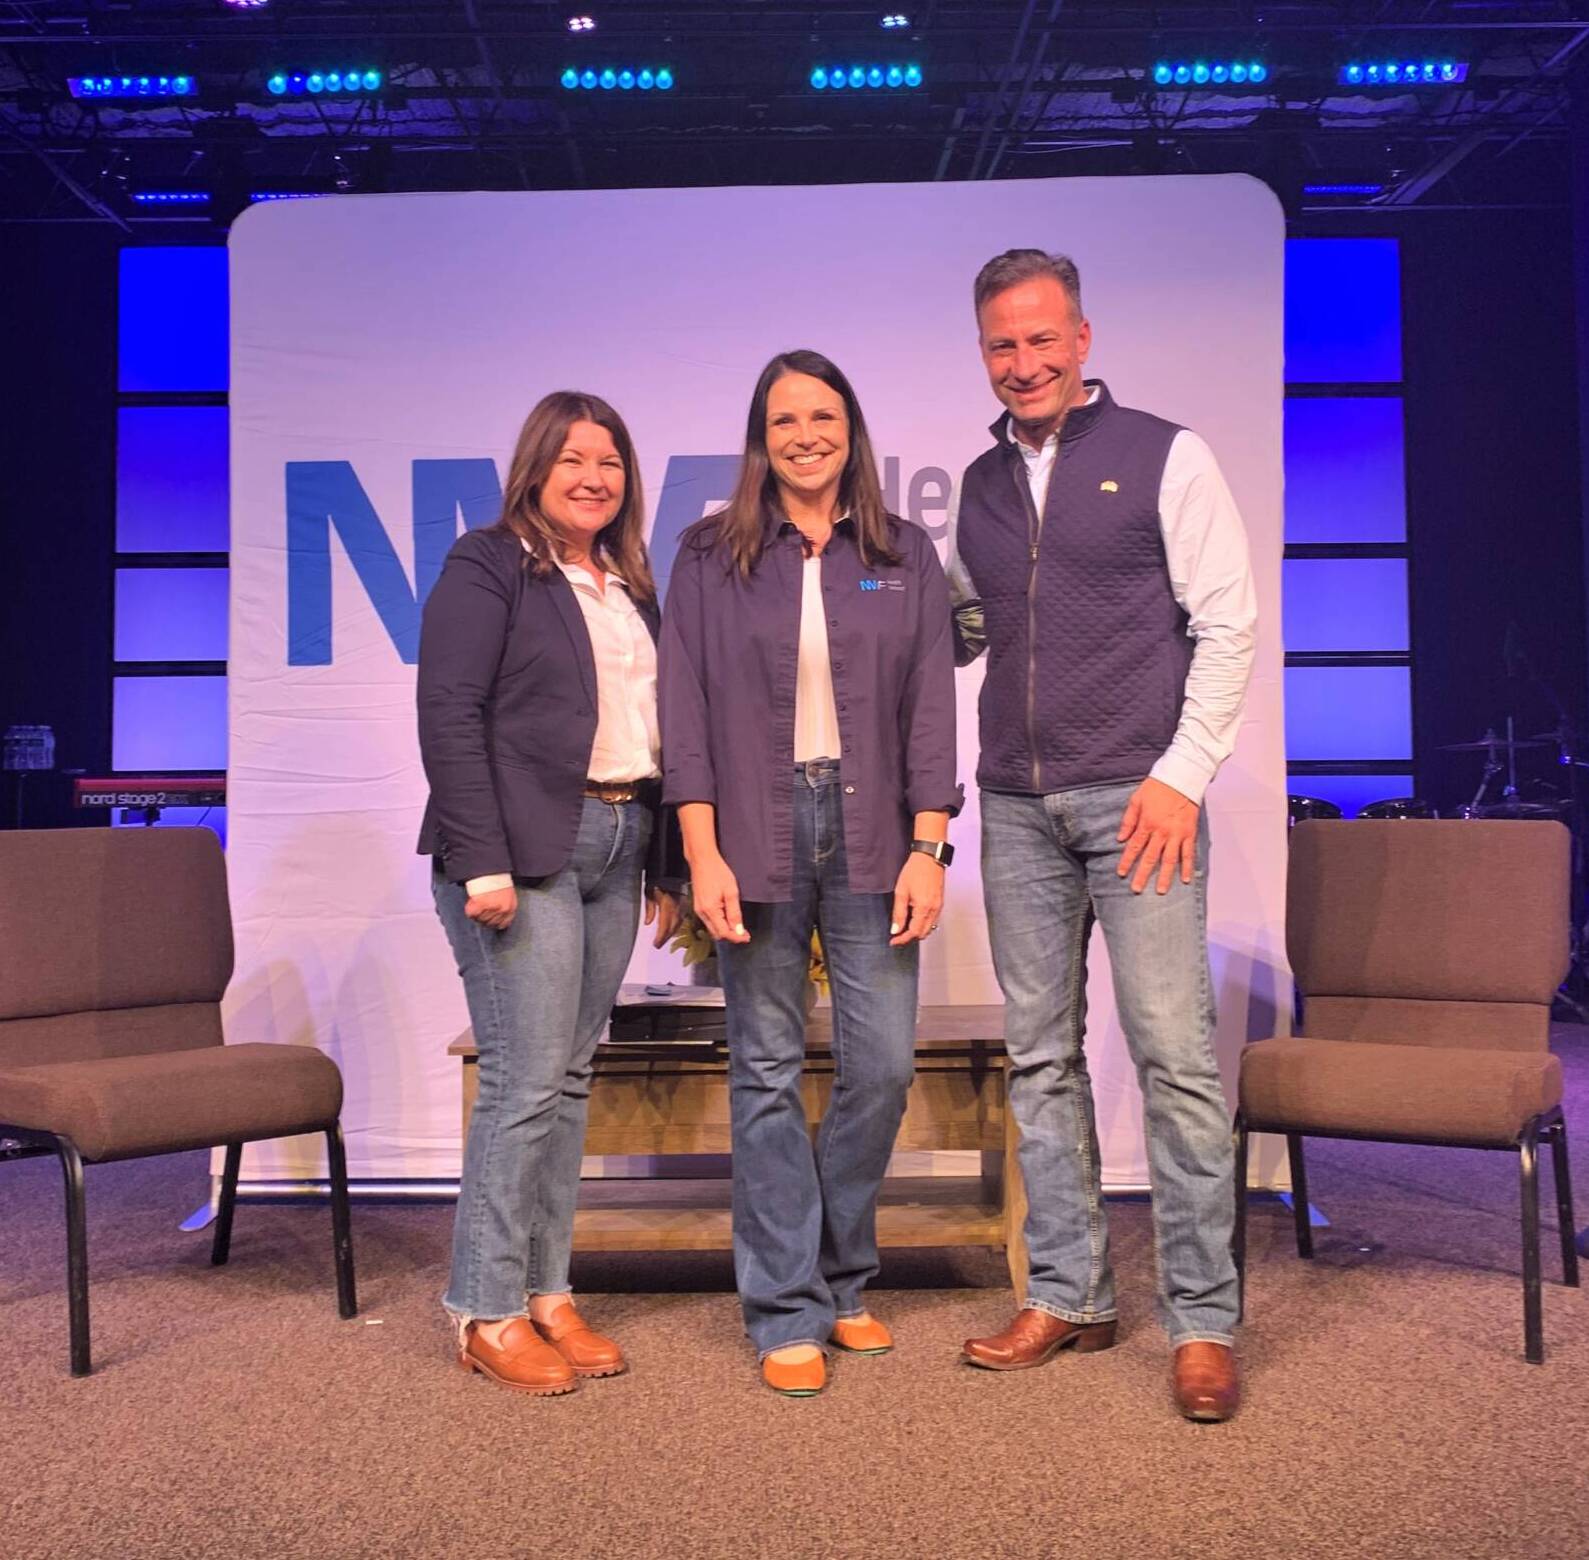 NWF Health Network - Mike, Rae, and Courtney on stage